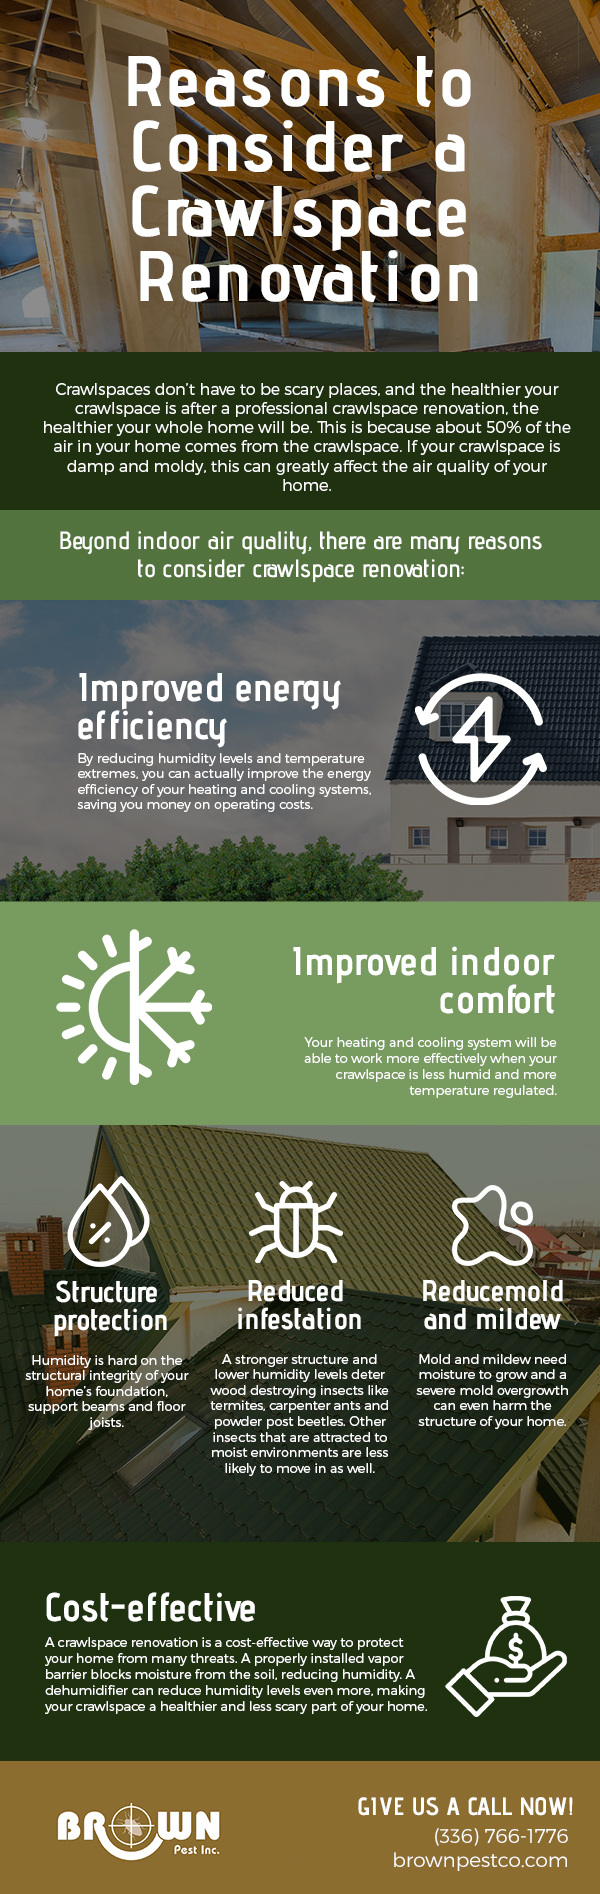 Reasons to Consider a Crawlspace Renovation [infographic]